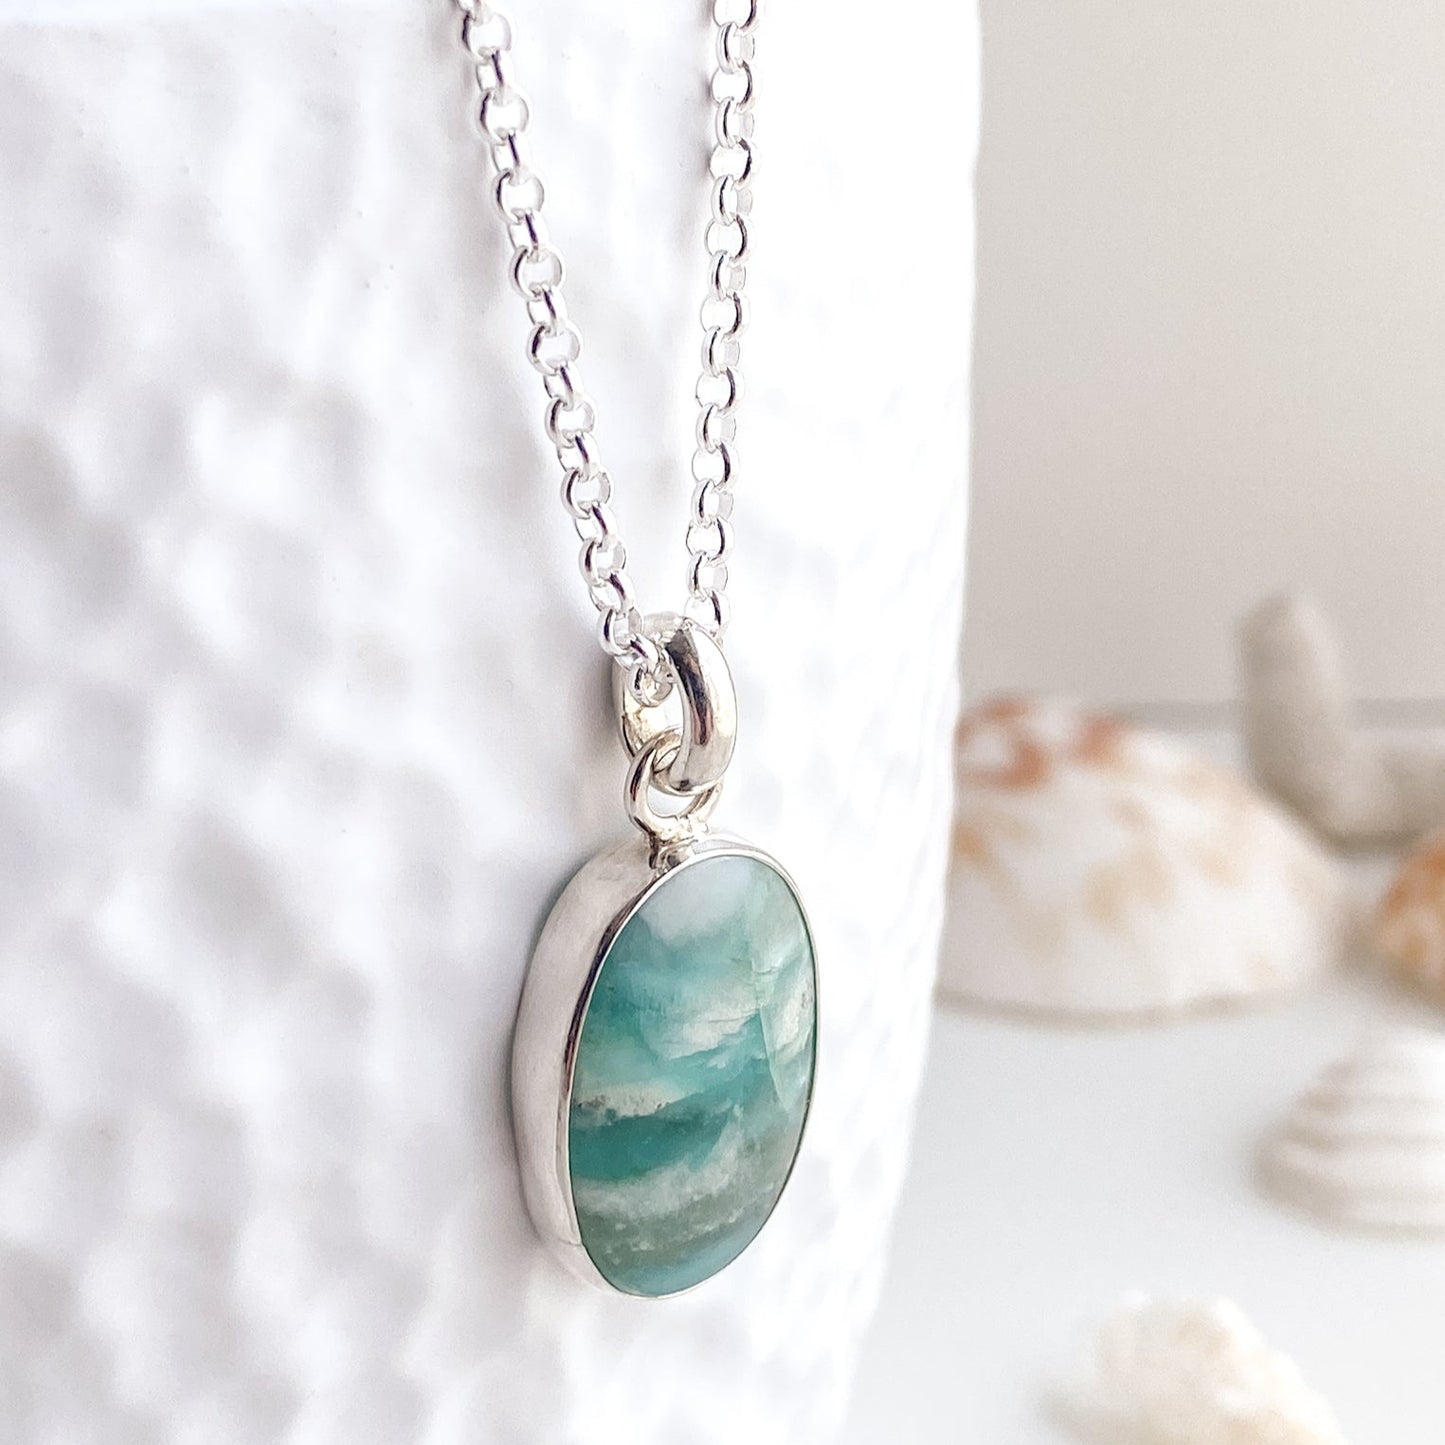 Opalized wood gemstone pendant in shades of aqua, teal, and white in a simple silver bezel setting.